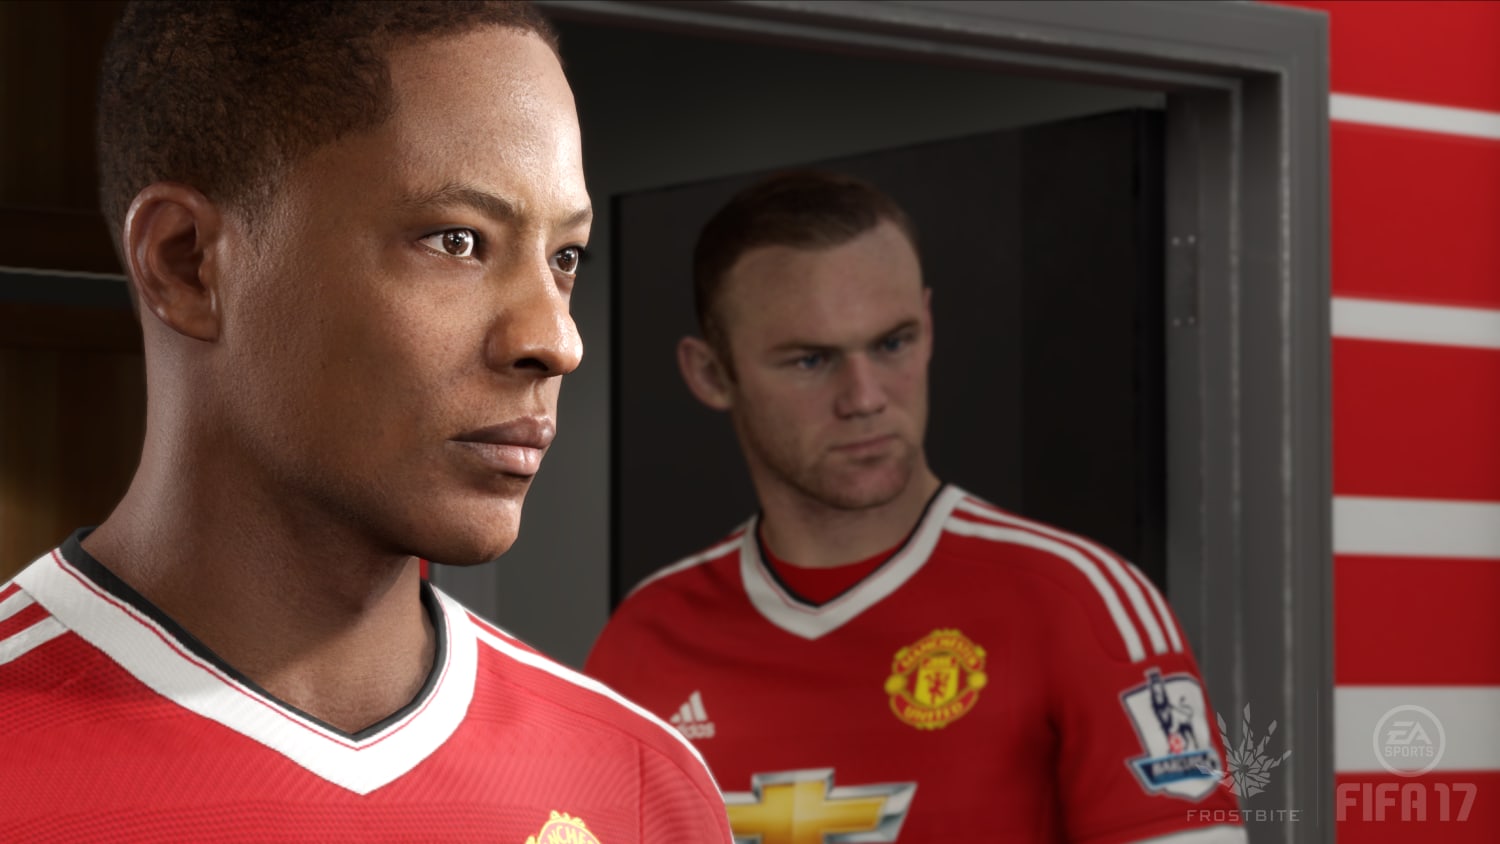 Fifa 17 The Journey Story Mode Features Red Bull